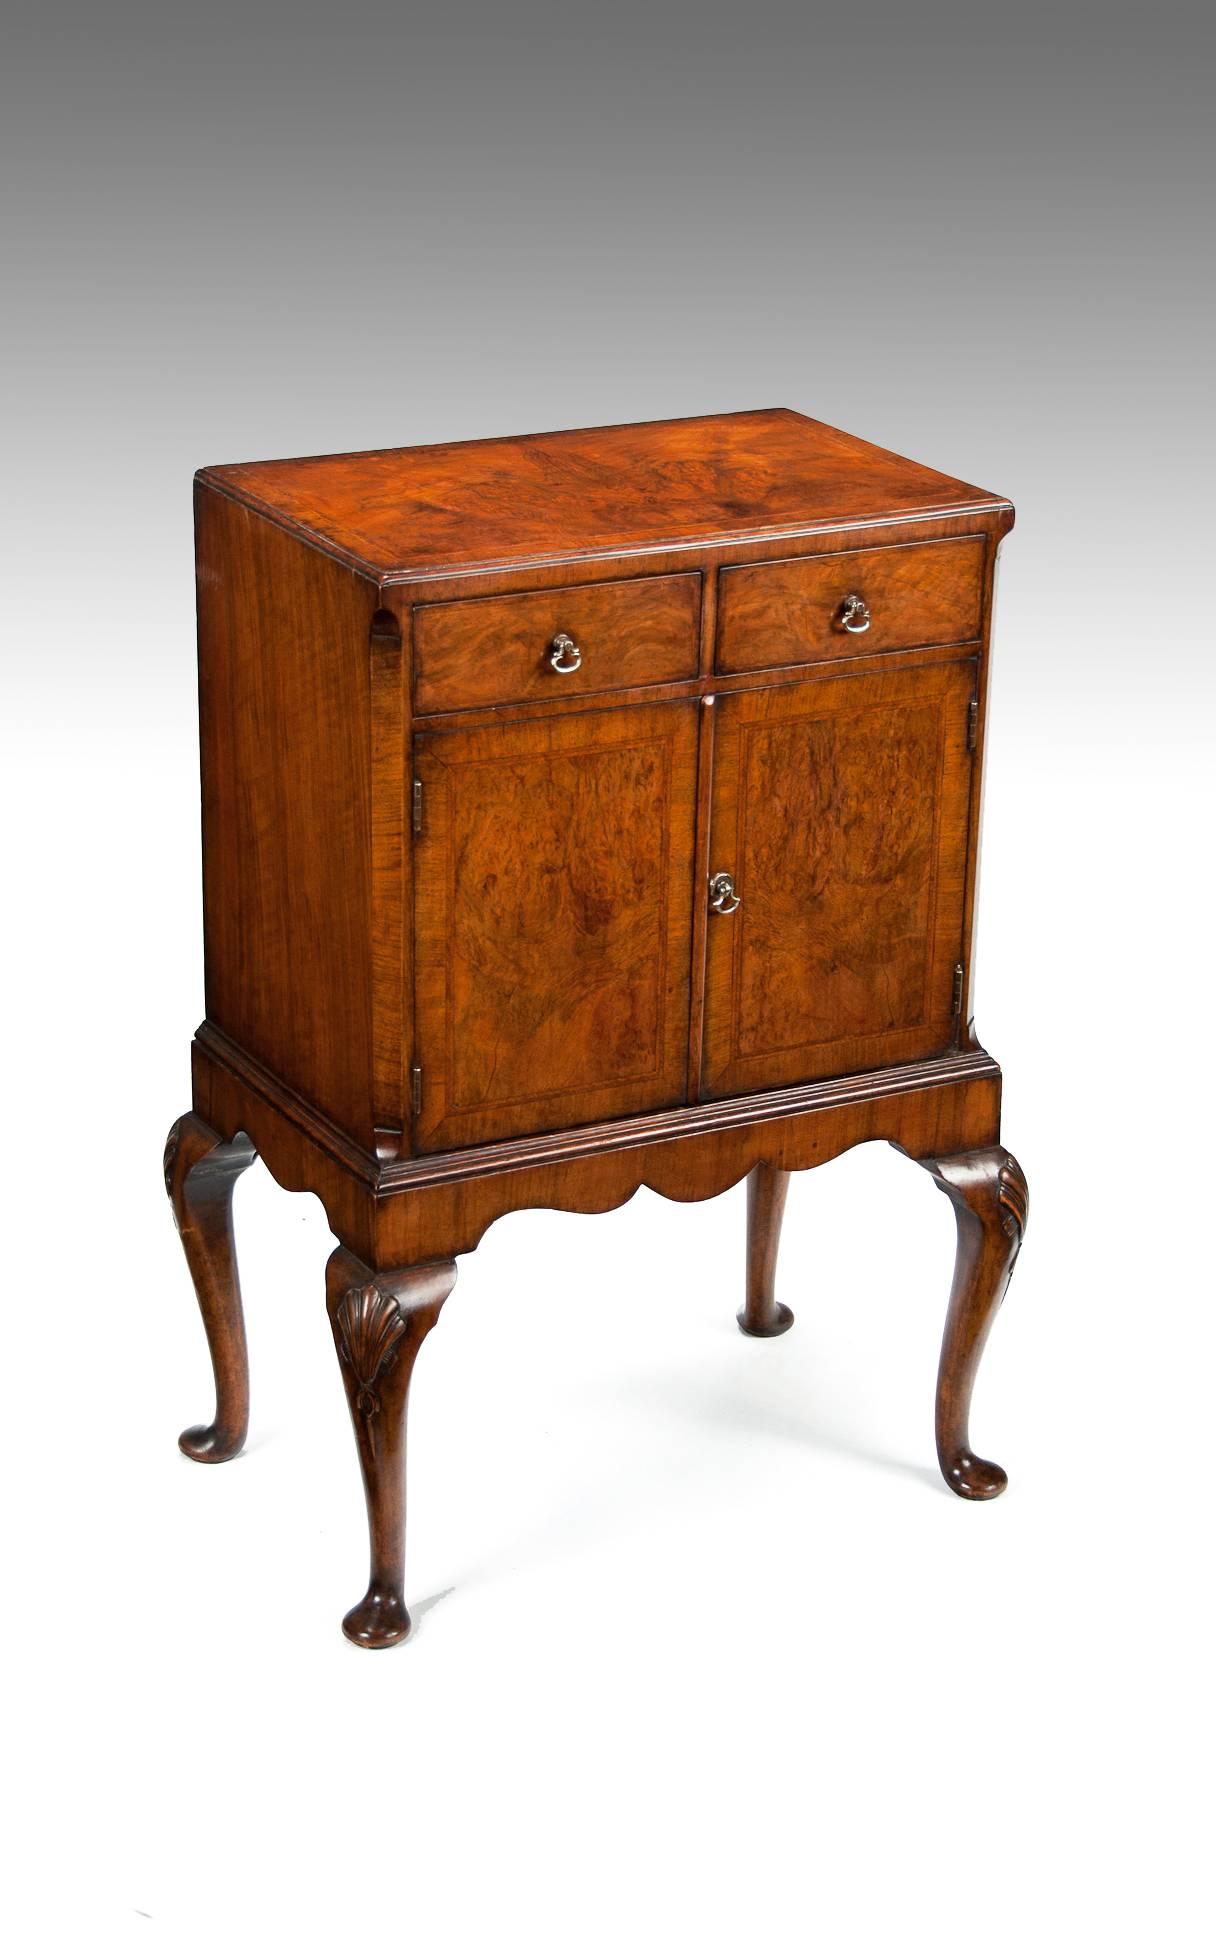 A quality antique burr walnut side cabinet on cabriole legs, circa 1900-1910.
Having a rectangular bookmatch veneered figured walnut top with a herringbone inlay enclosed by a crossbanded border and moulded edge over two fully oak lined handcut